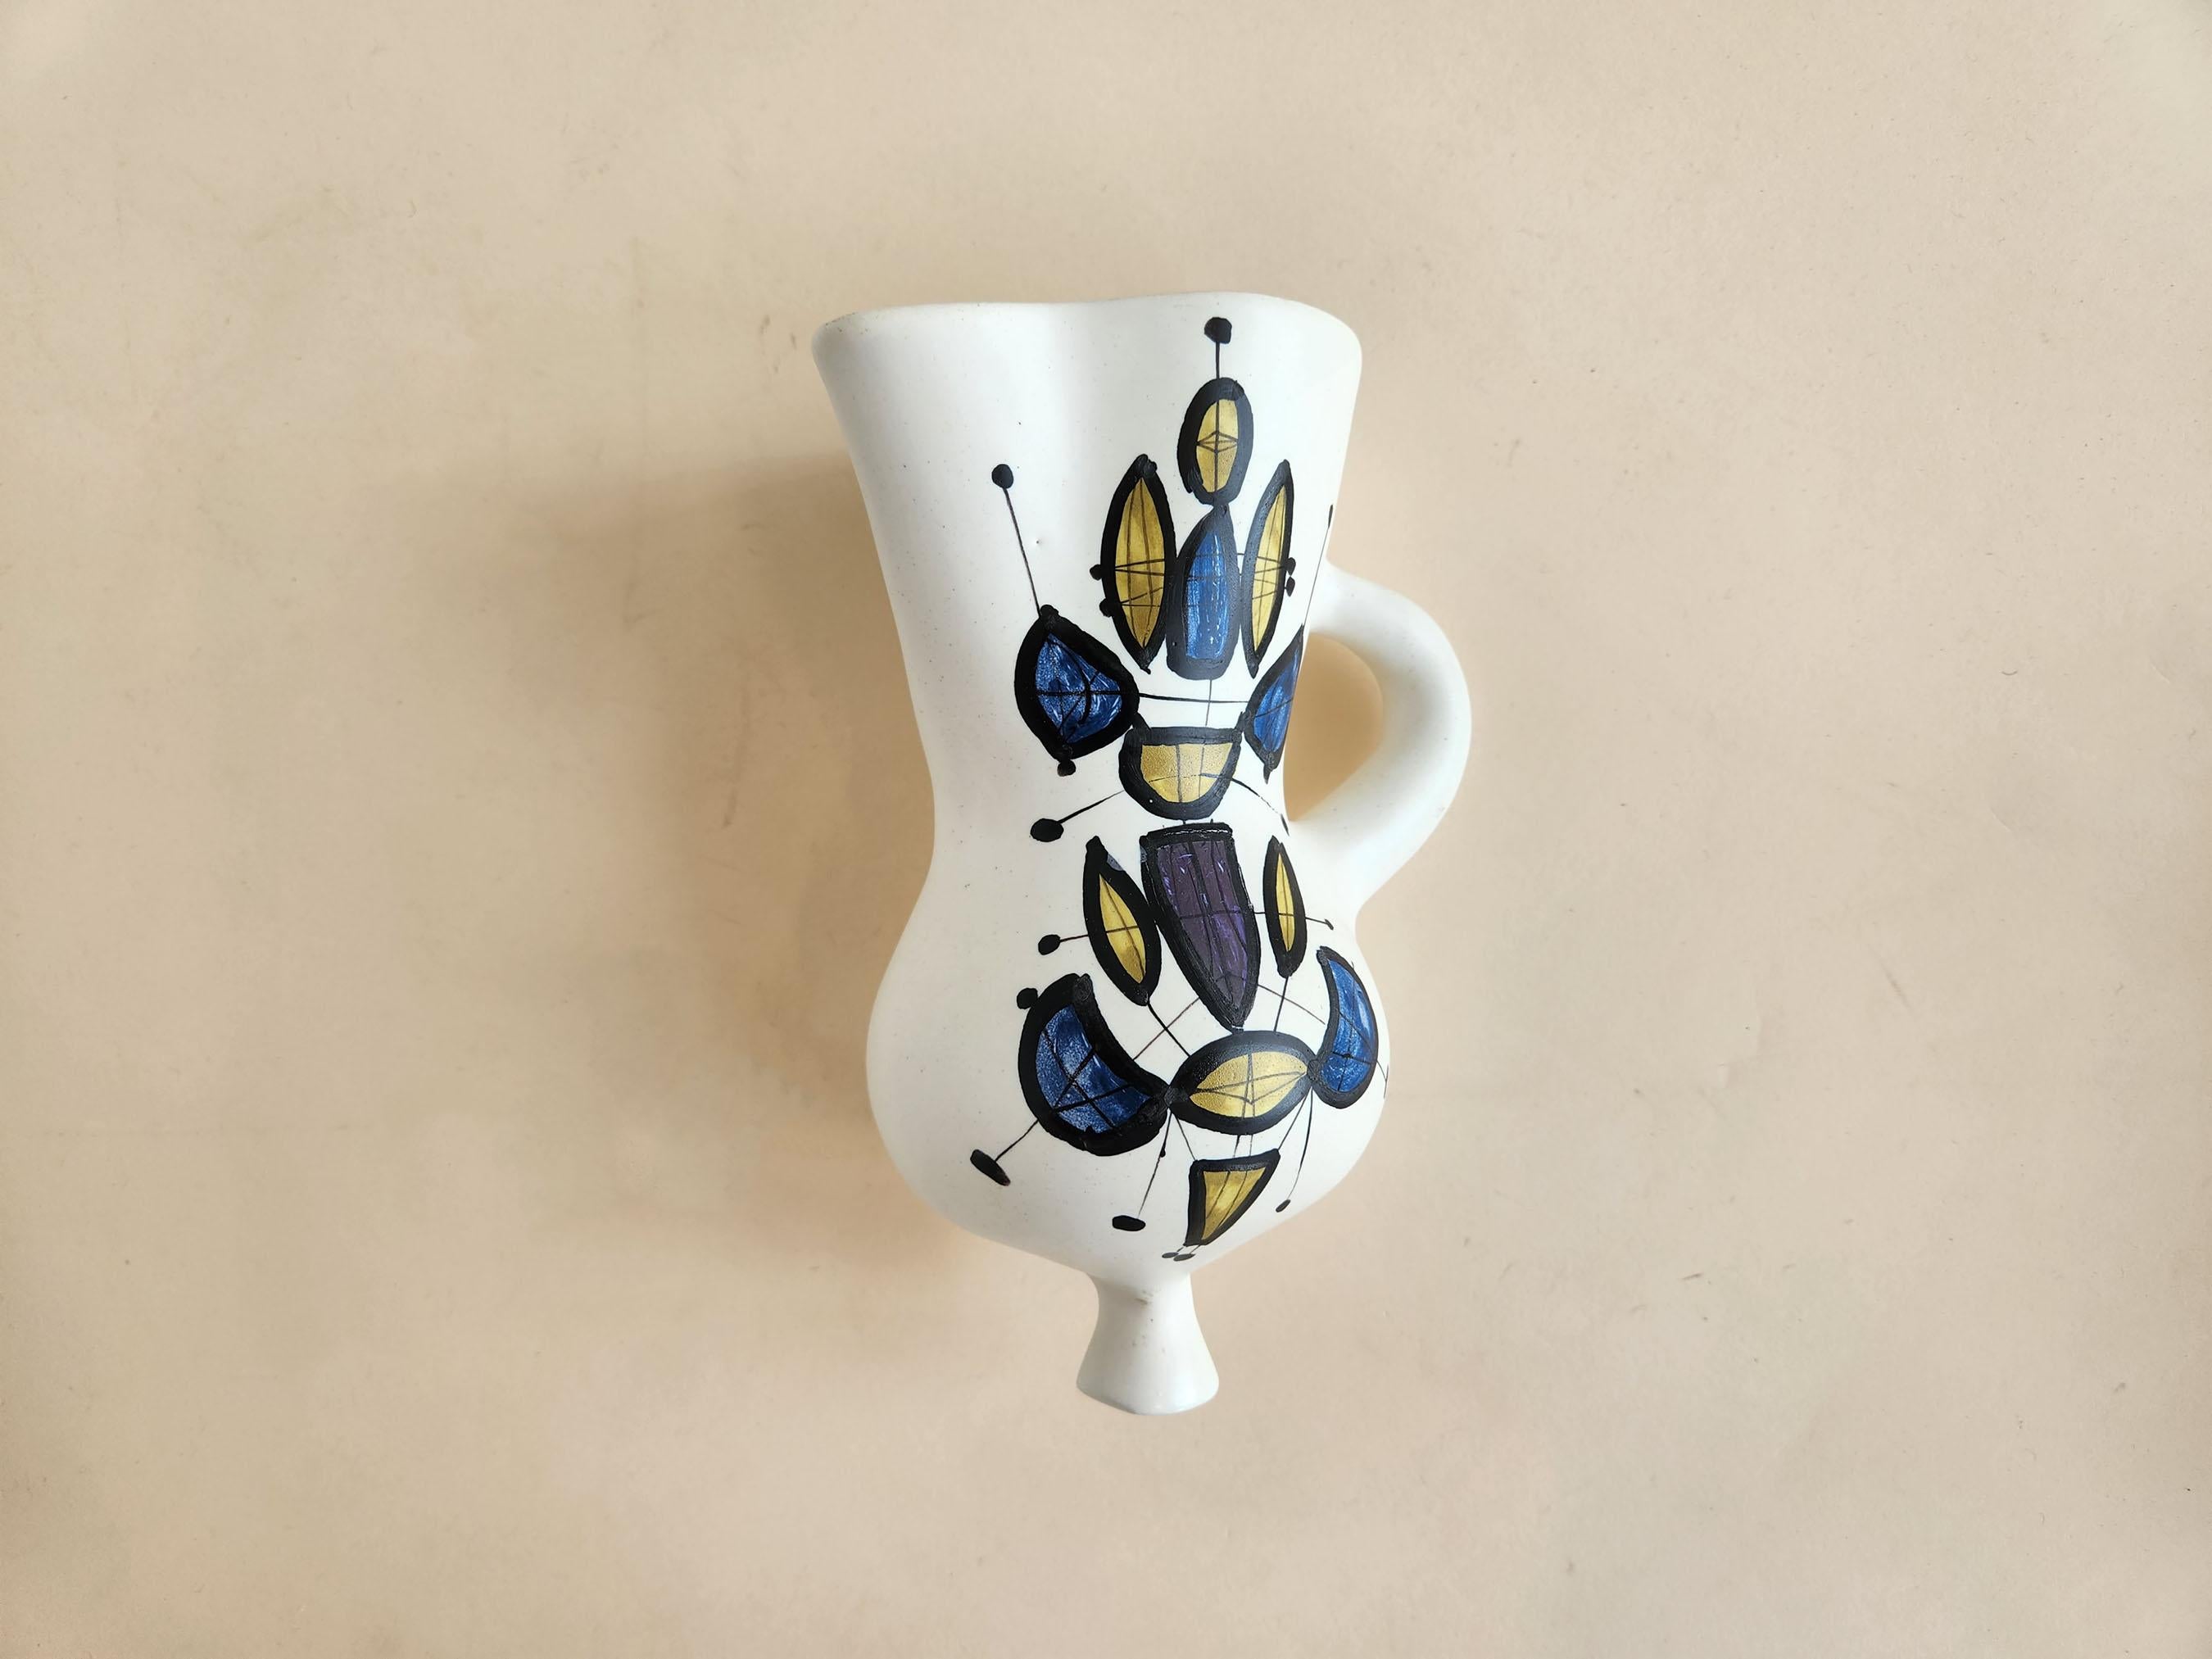 Vintage Ceramic Wall Mounted Vase with Abstract Motif by Roger Capron - Vallauris, France

Roger Capron was in influential French ceramicist, known for his tiled tables and his use of recurring motifs such as stylized branches and geometrical suns. 